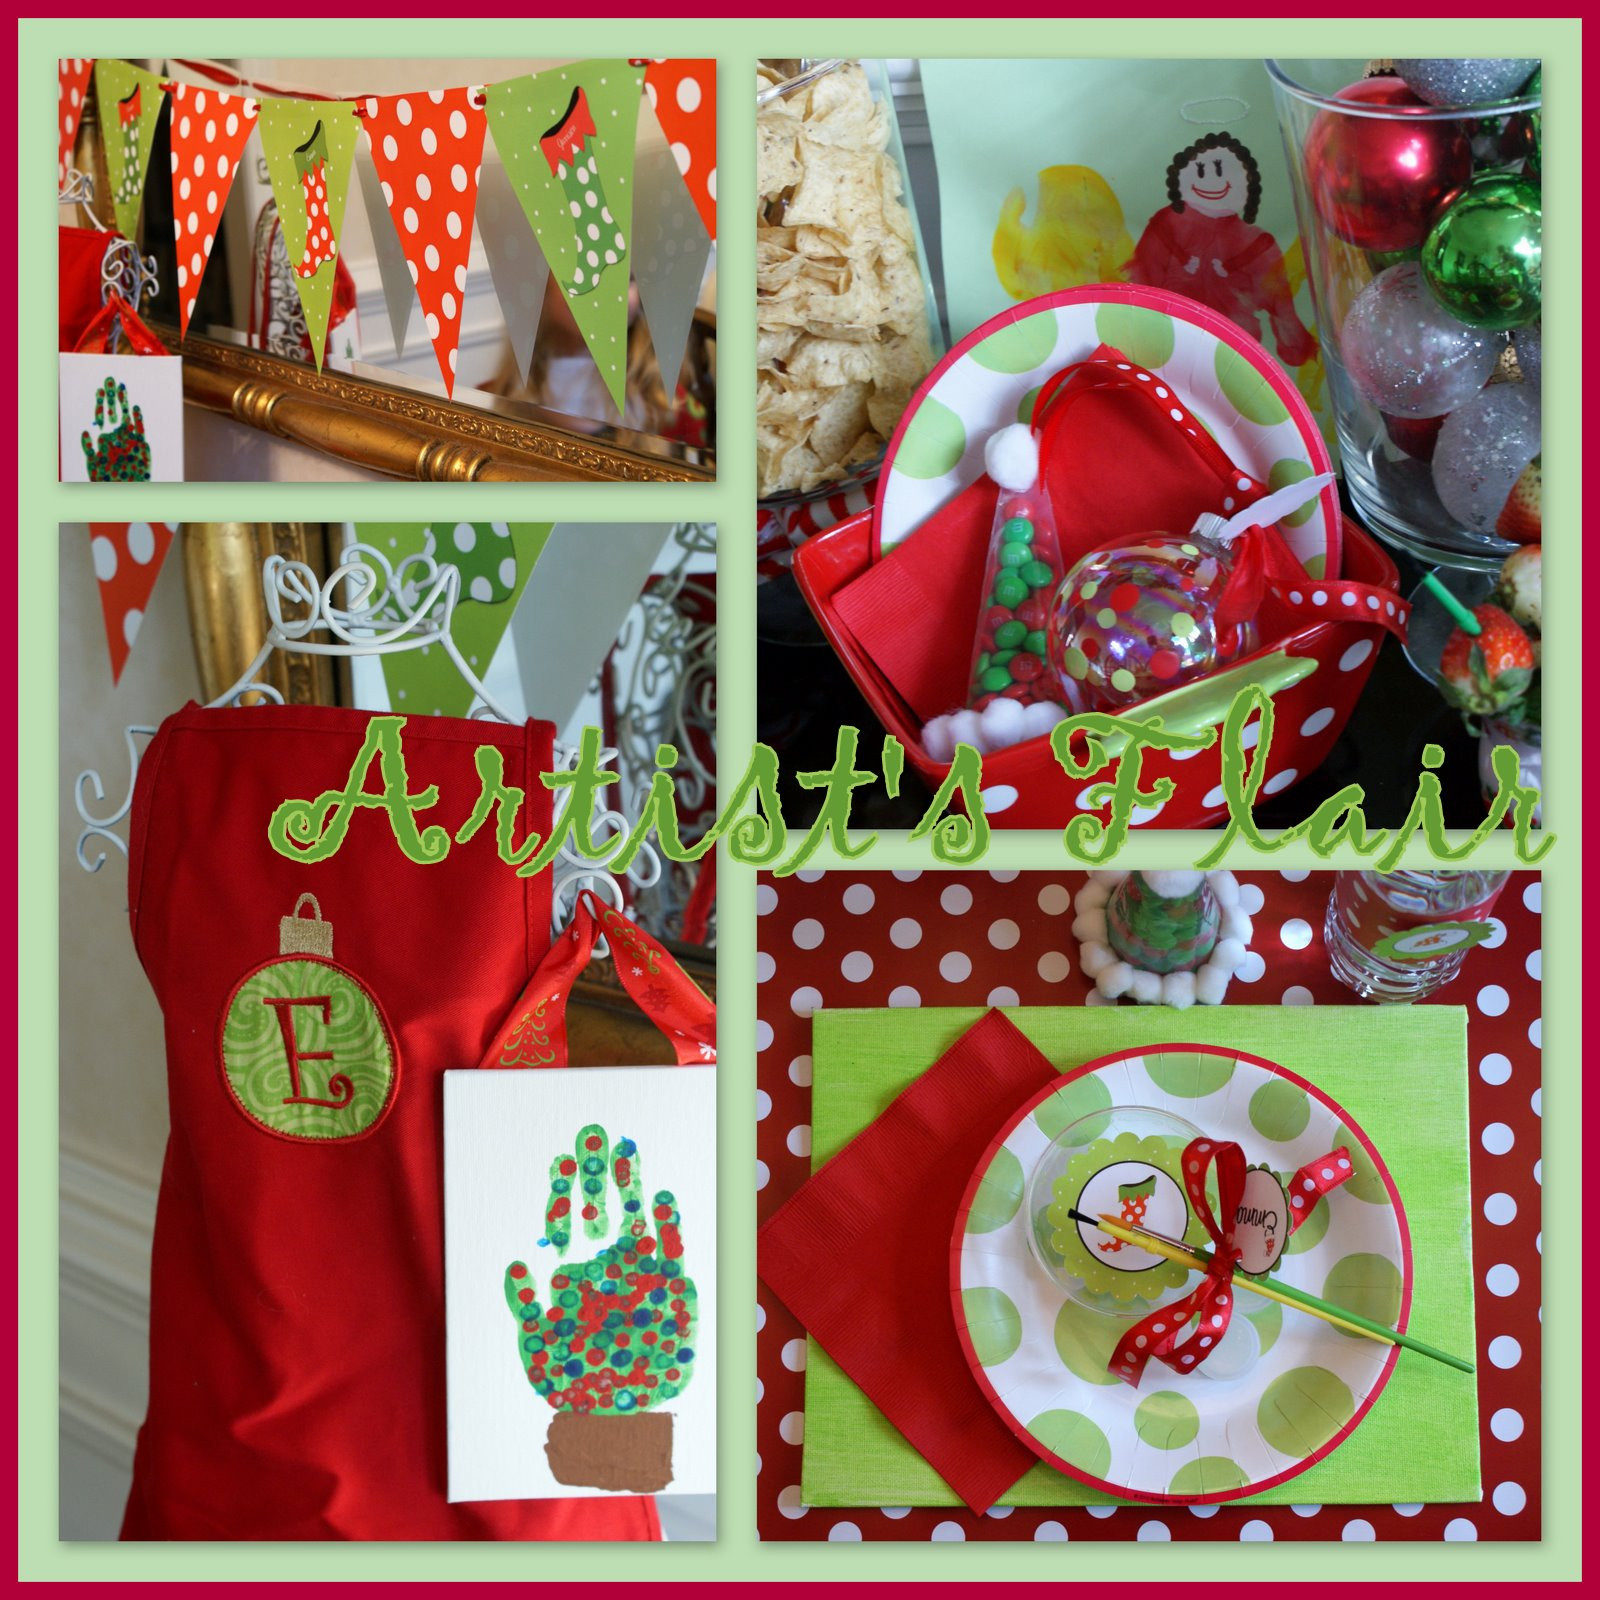 Christmas Theme Party Ideas
 A Little Loveliness Christmas P art y